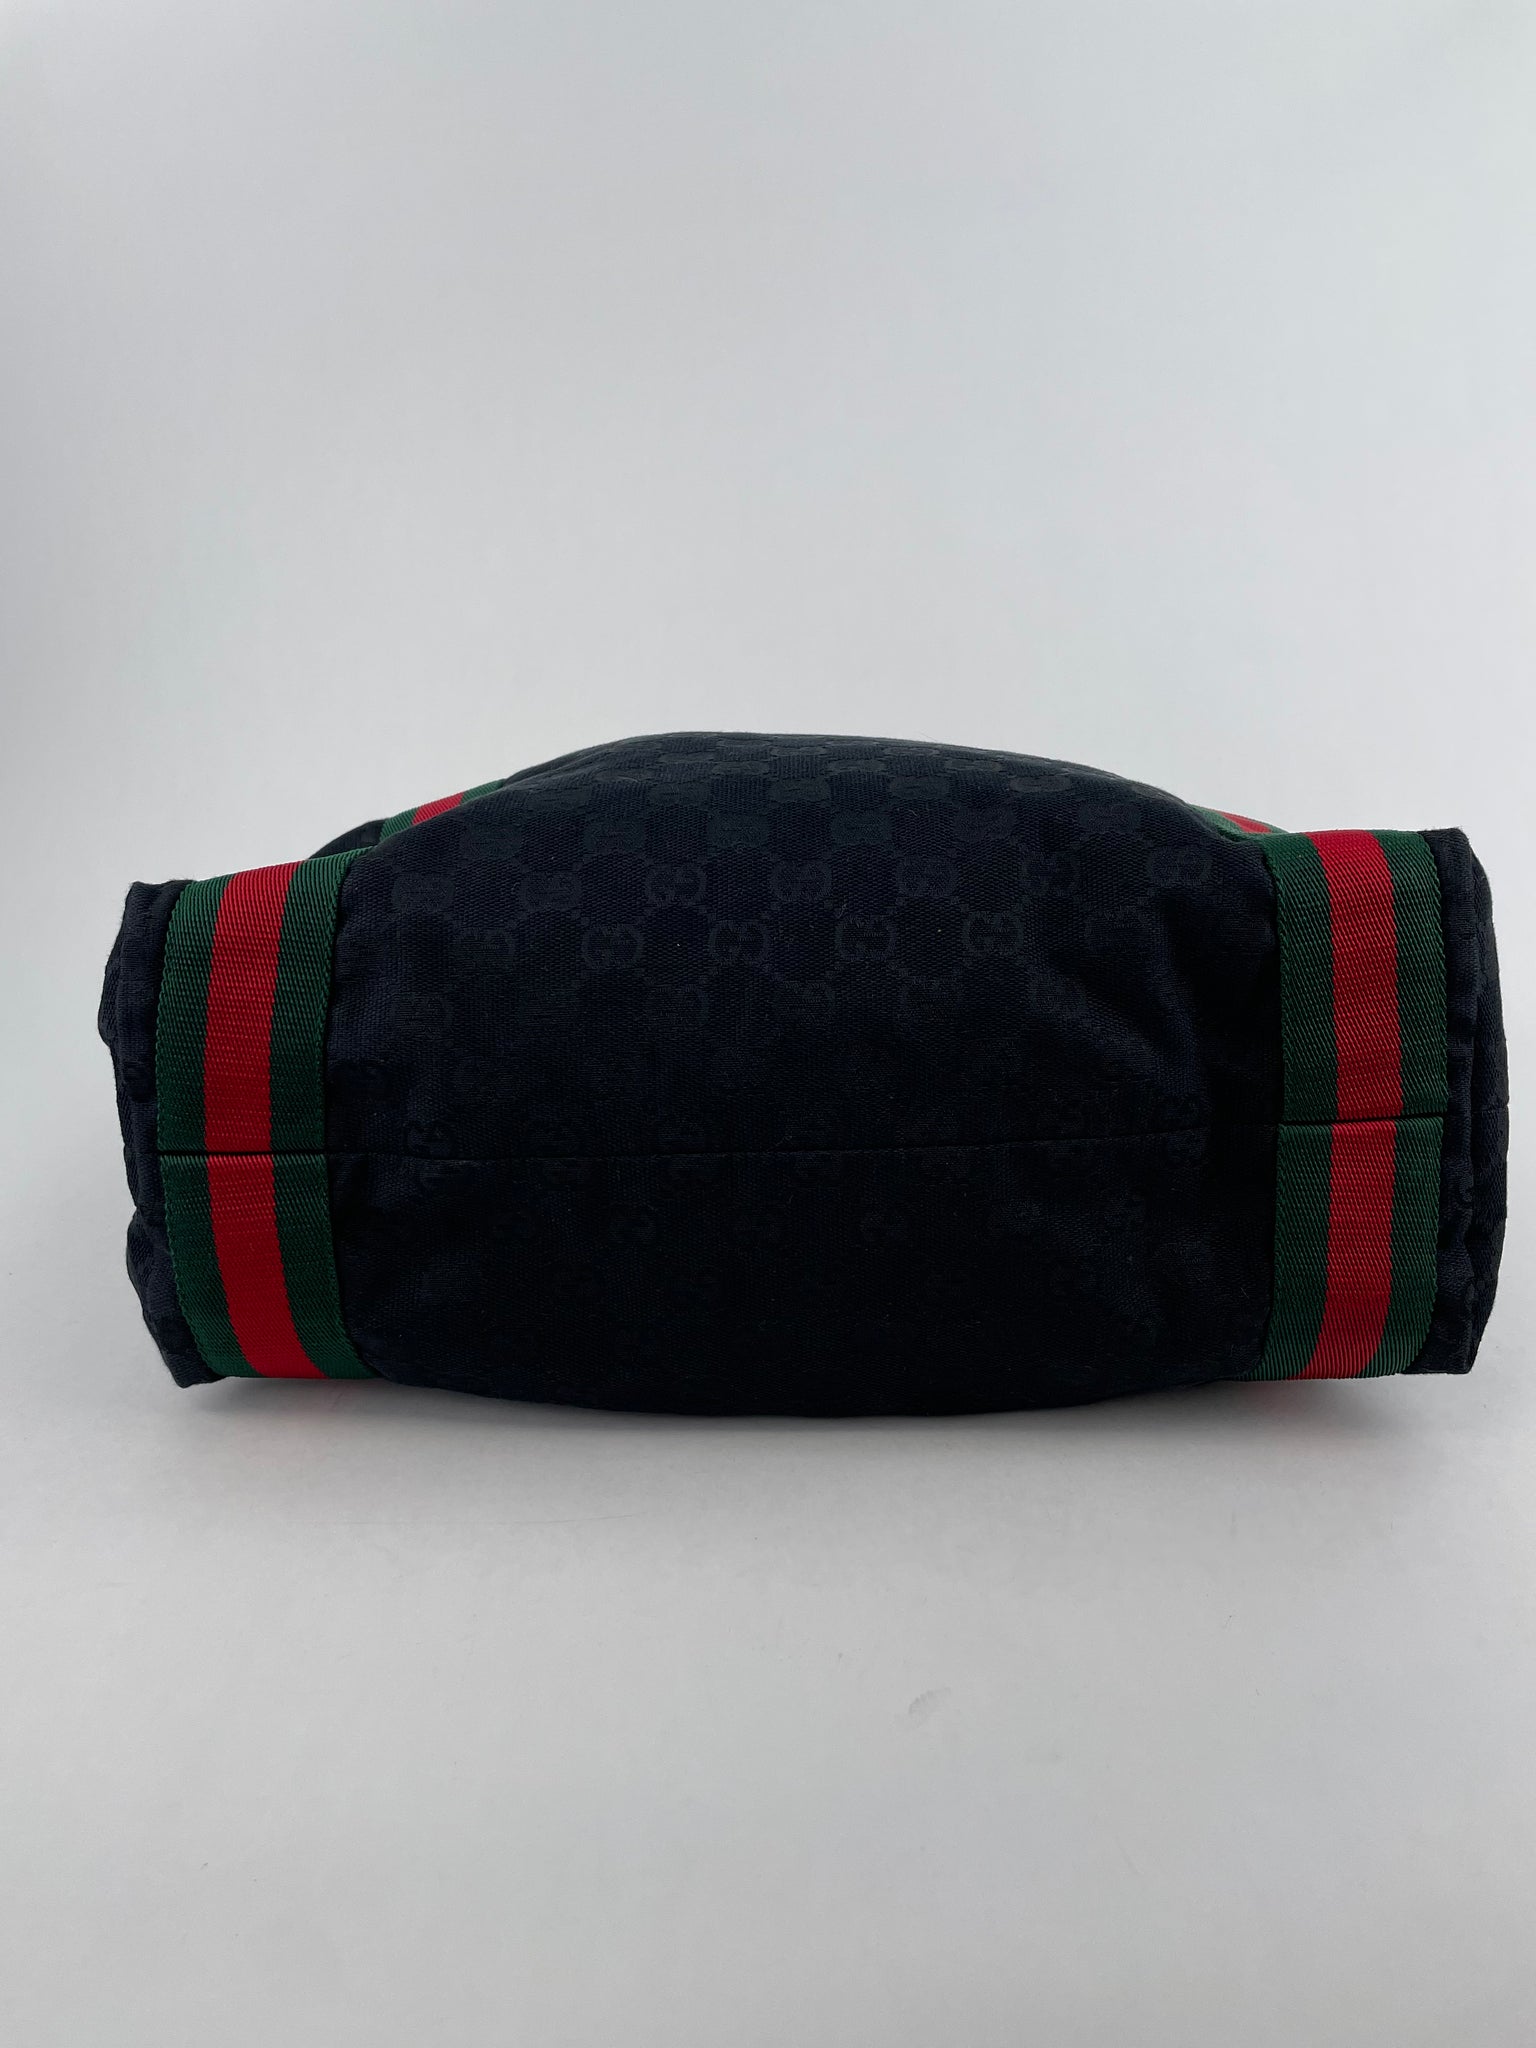 Gucci GG Supreme Coated Canvas Kerrion Bag